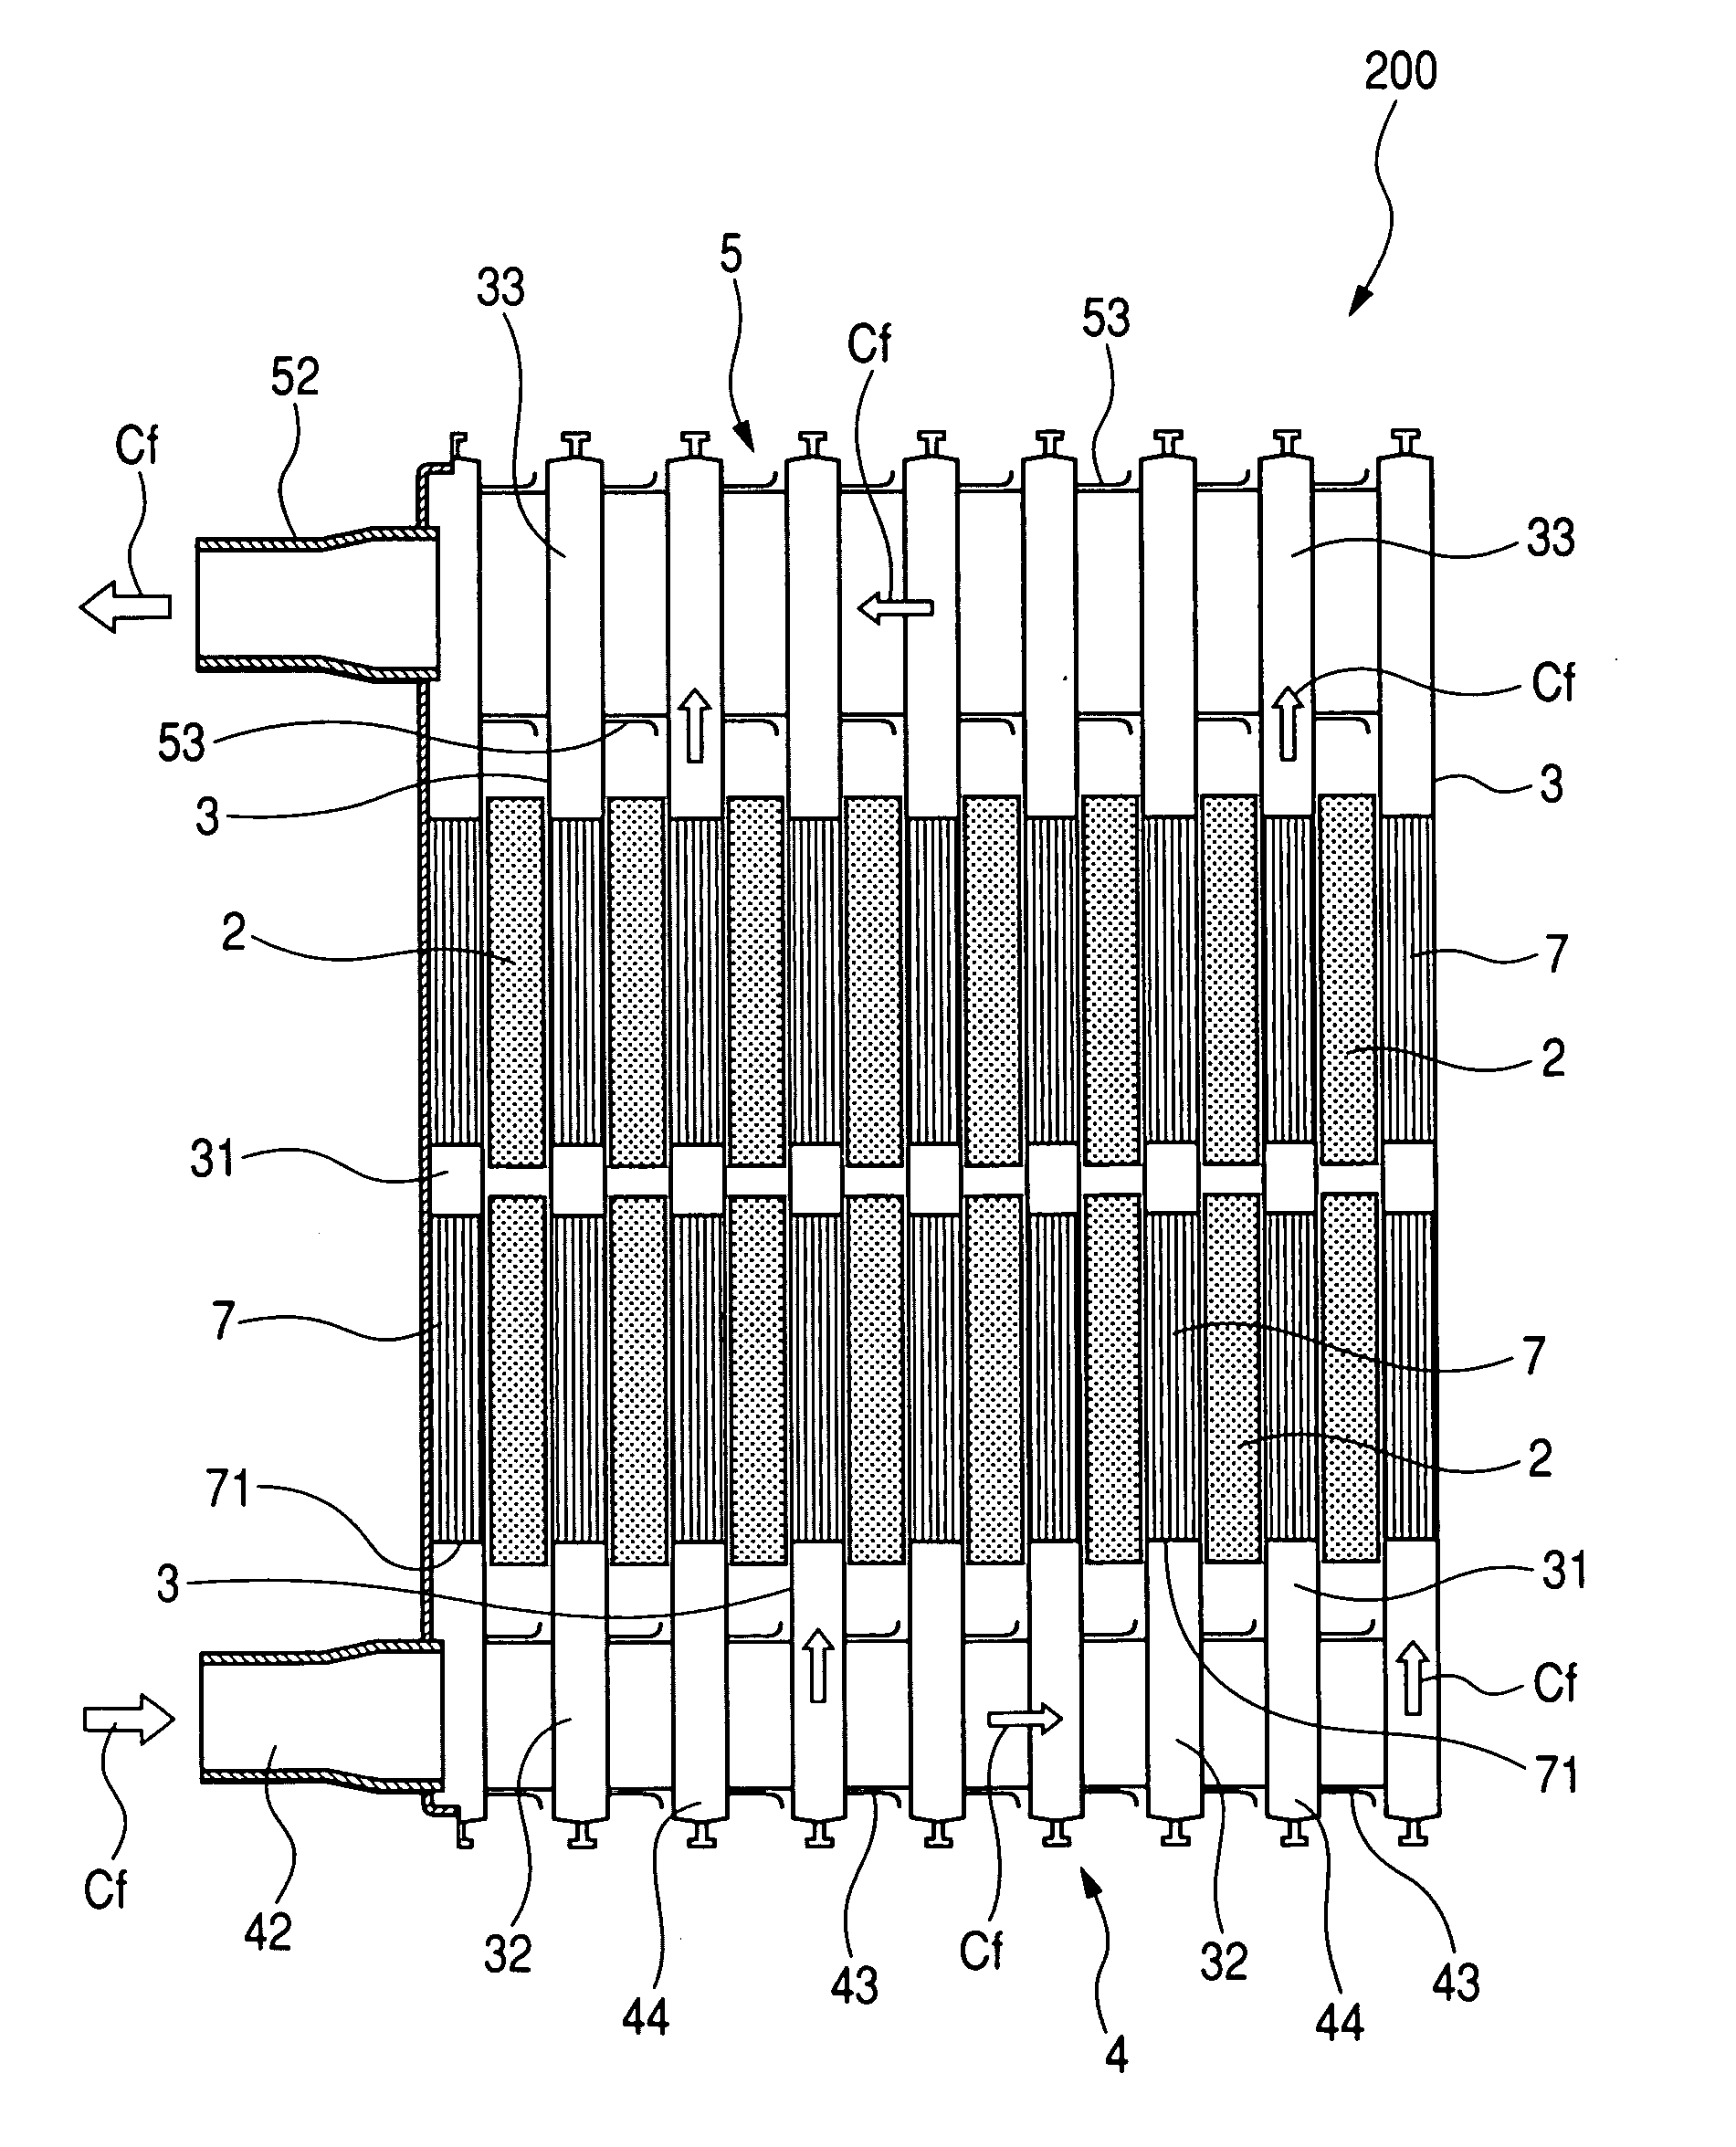 Liquid-cooled semiconductor unit for cooling high-power semiconductor elements that are enclosed in modules